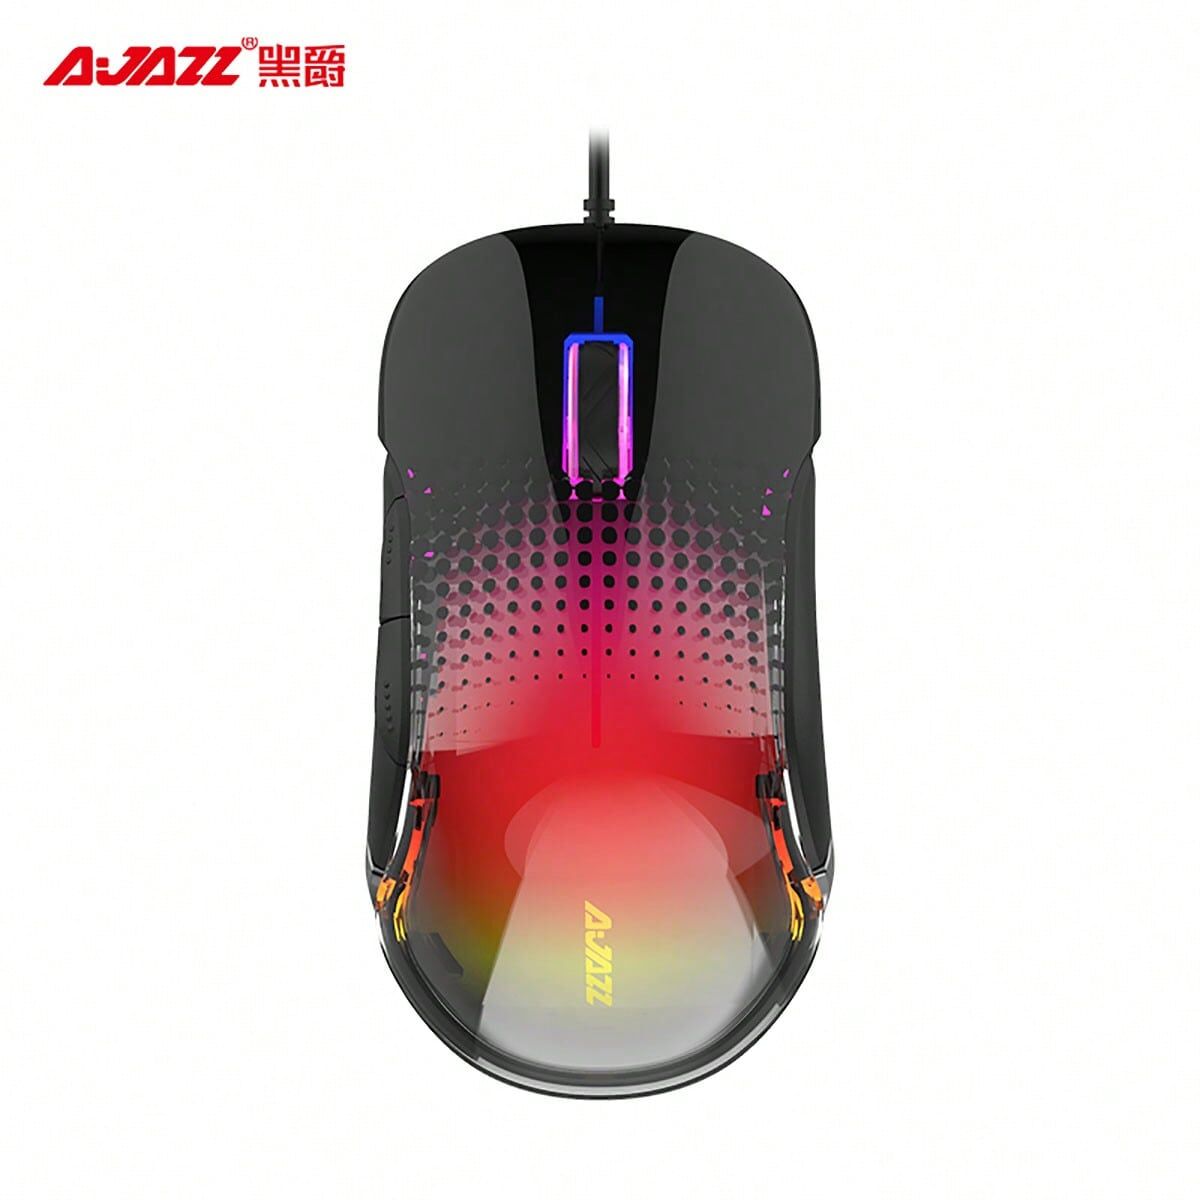 SHEIN AJAZZ AJ358 wired gaming mouse notebook desktop computer e-sports office dedicated BLACK Black one-size